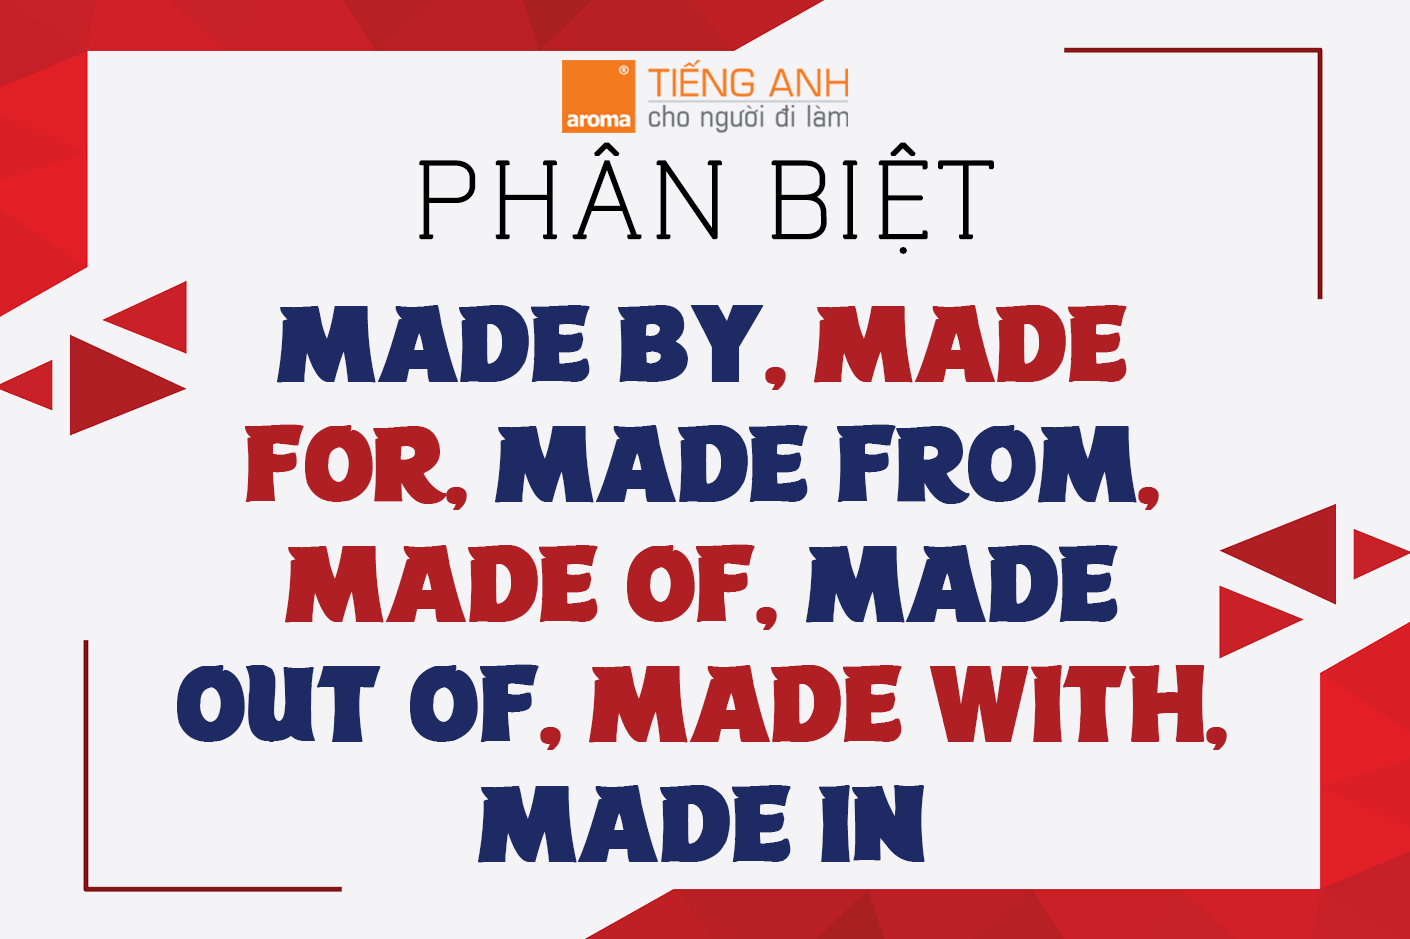 Phan-biet-made-by-made-for-made-from-made-of-made-out-of-made-with-made-in-tieng-anh